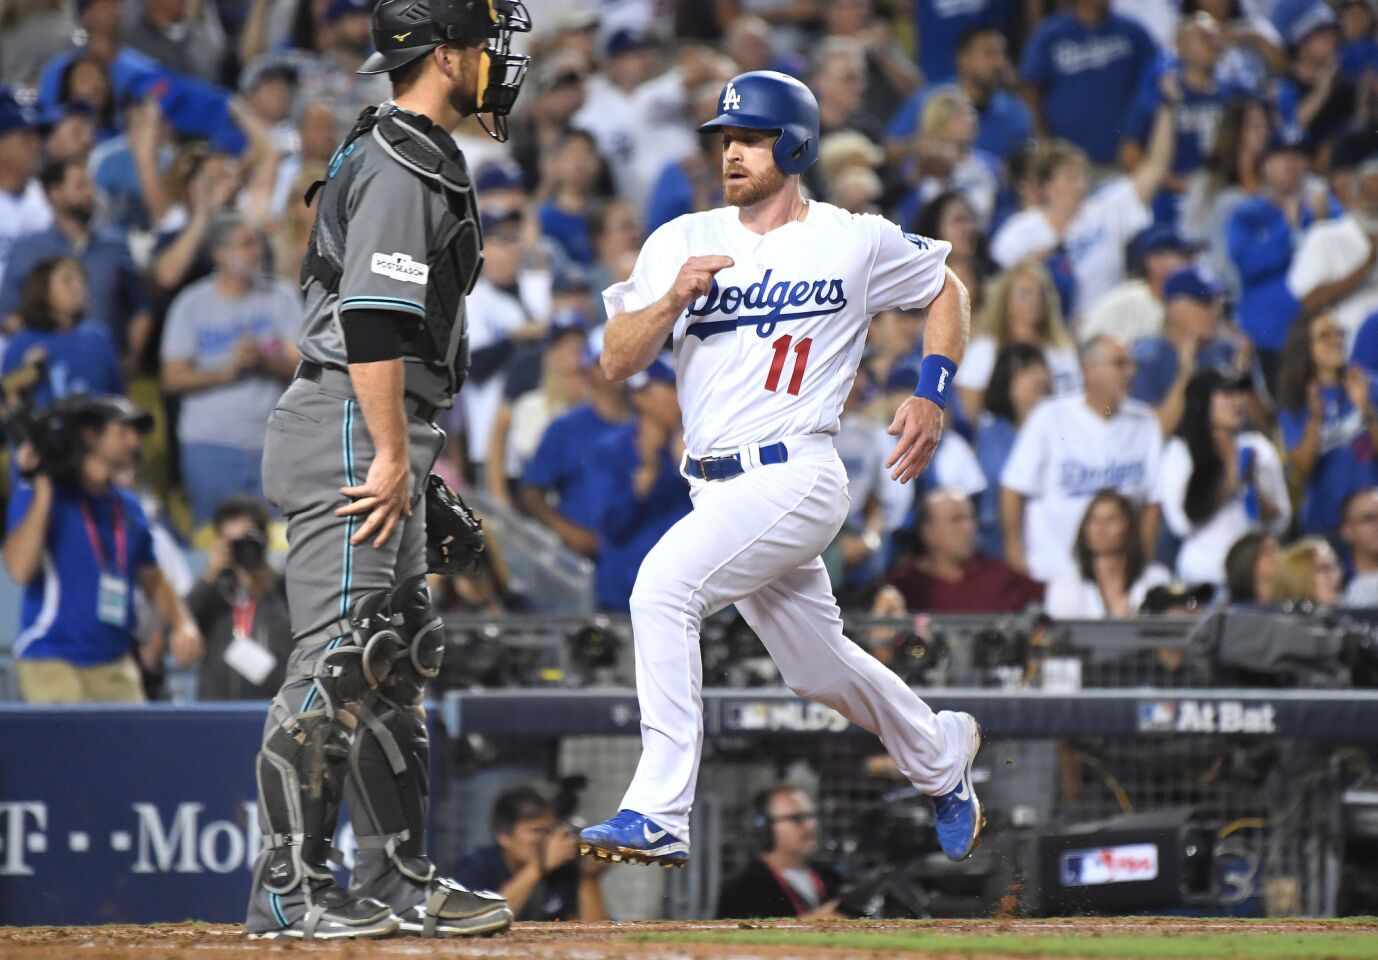 Dodgers second baseman Logan Forsythe scores in front of Diamondbacks catcher Jeff Mathis on a single by Corey Seager in the fourth inning in Game 1 of the NLDS at Dodger Stadium.